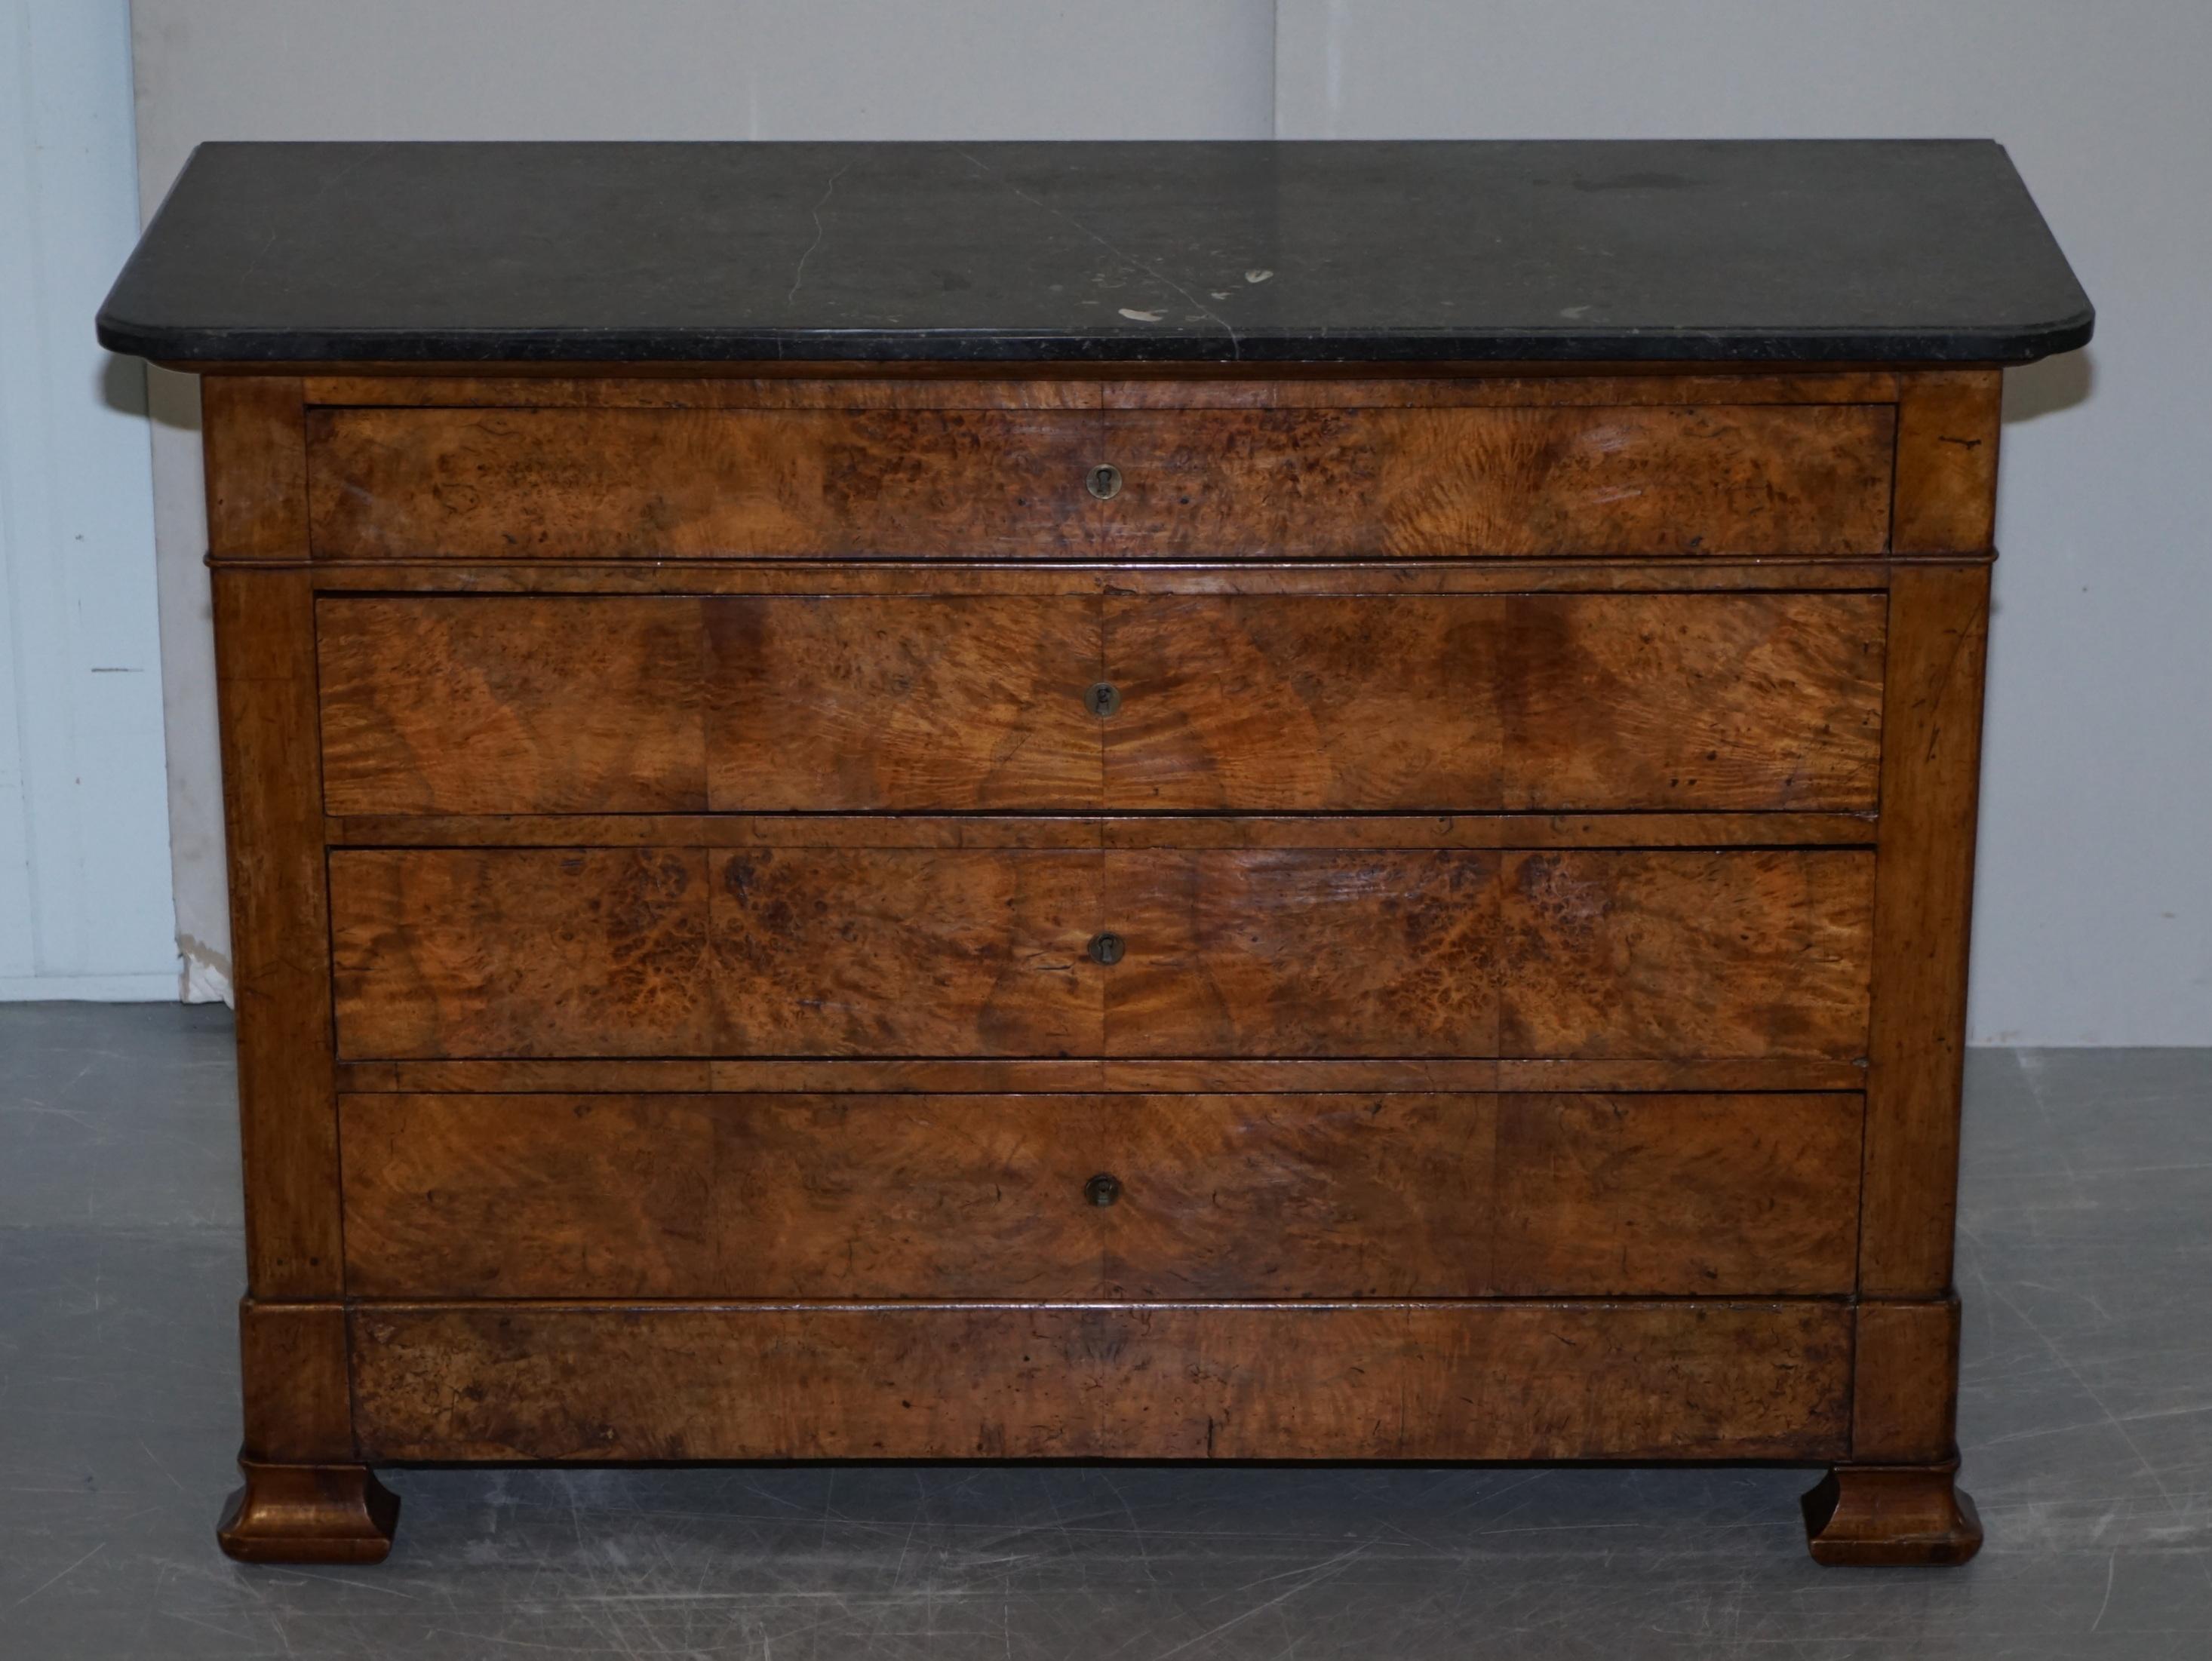 We are delighted to offer for sale this truly exquisite original circa 1860 Louis Philippe burr walnut commode in burr walnut with a fossil marble top

What a beautiful find, the timber patina is sublime, it has to be the most glorious cuts of